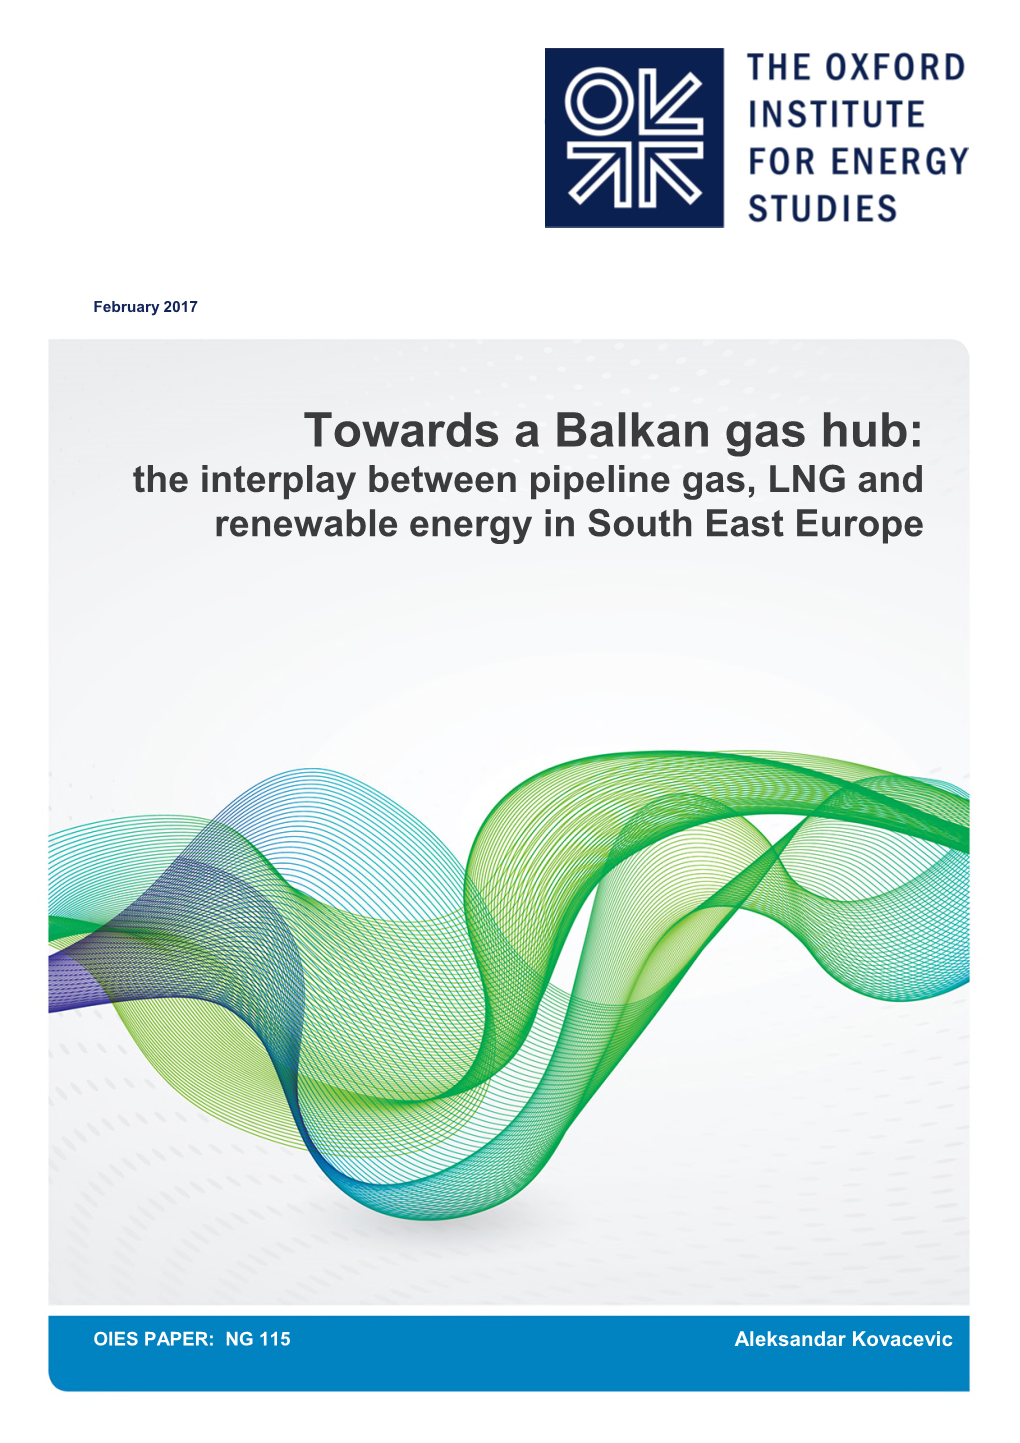 Towards a Balkan Gas Hub: the Interplay Between Pipeline Gas, LNG and Renewable Energy in South East Europe